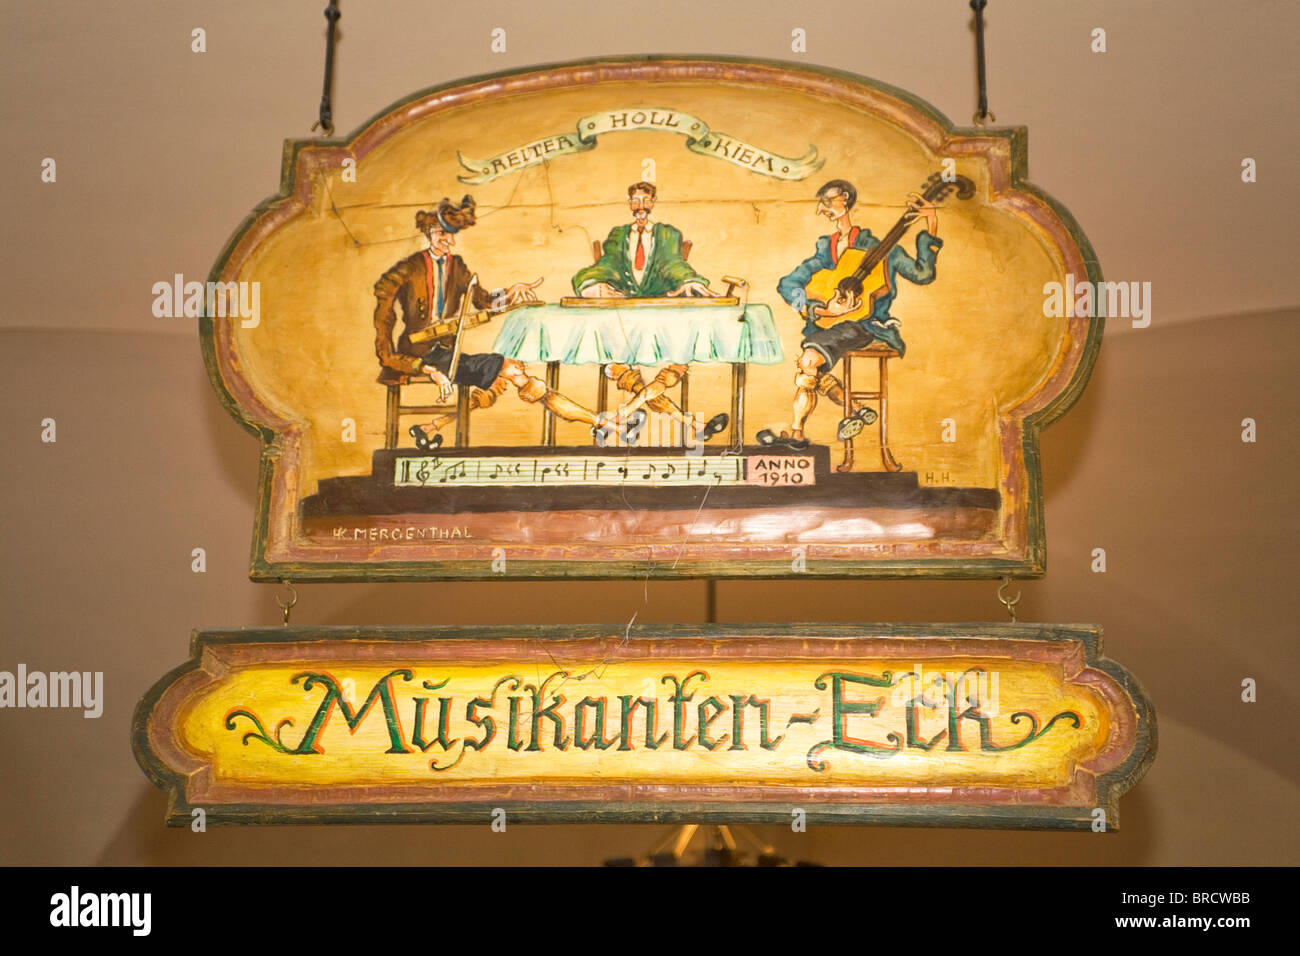 A sign for a regulars' table (Stammtisch) for musicians in the Hofbraeuhaus in Munich, Bavaria, Germany. Stock Photo